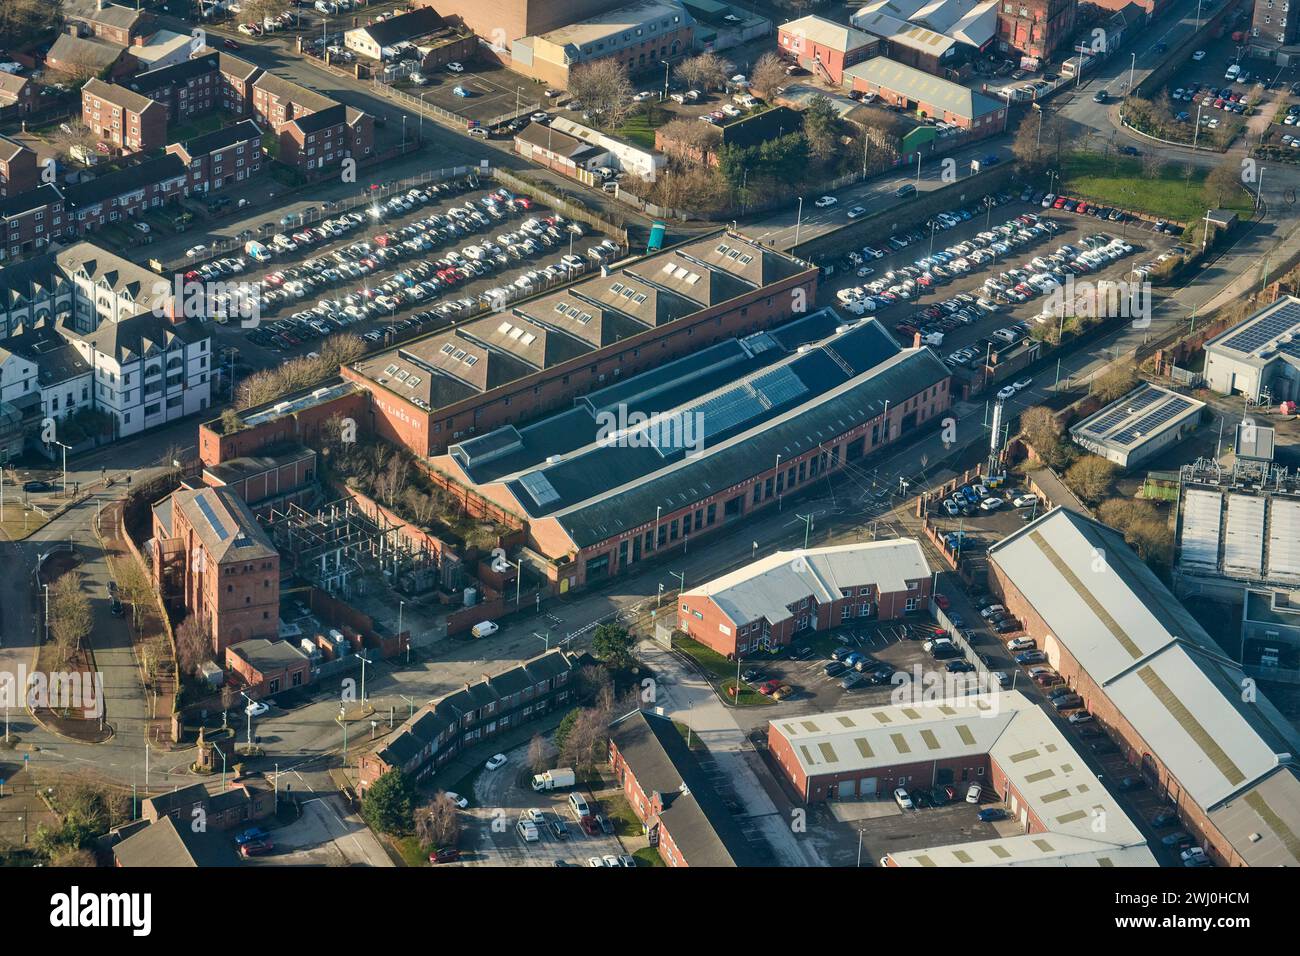 The old Cheshire Lines station building, Birkenhead, north west England, Merseyside, UK, from the air. Stock Photo